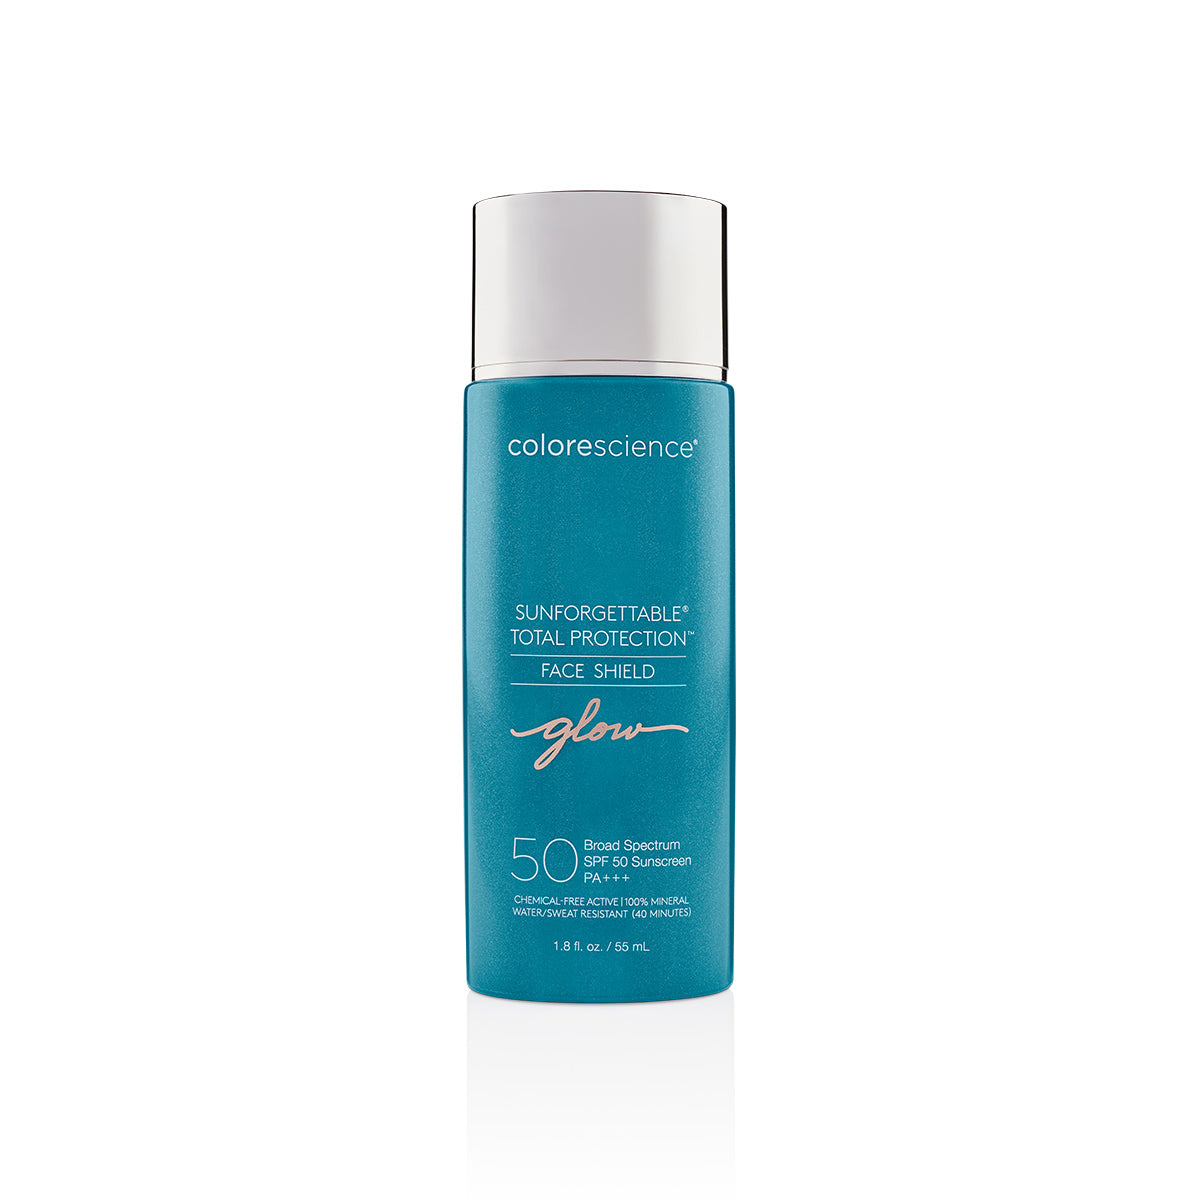 COLORSCIENCE SUNFORGETTABLE FACE SHIELD GLOW SPF50 55 ML | The Glow Shop